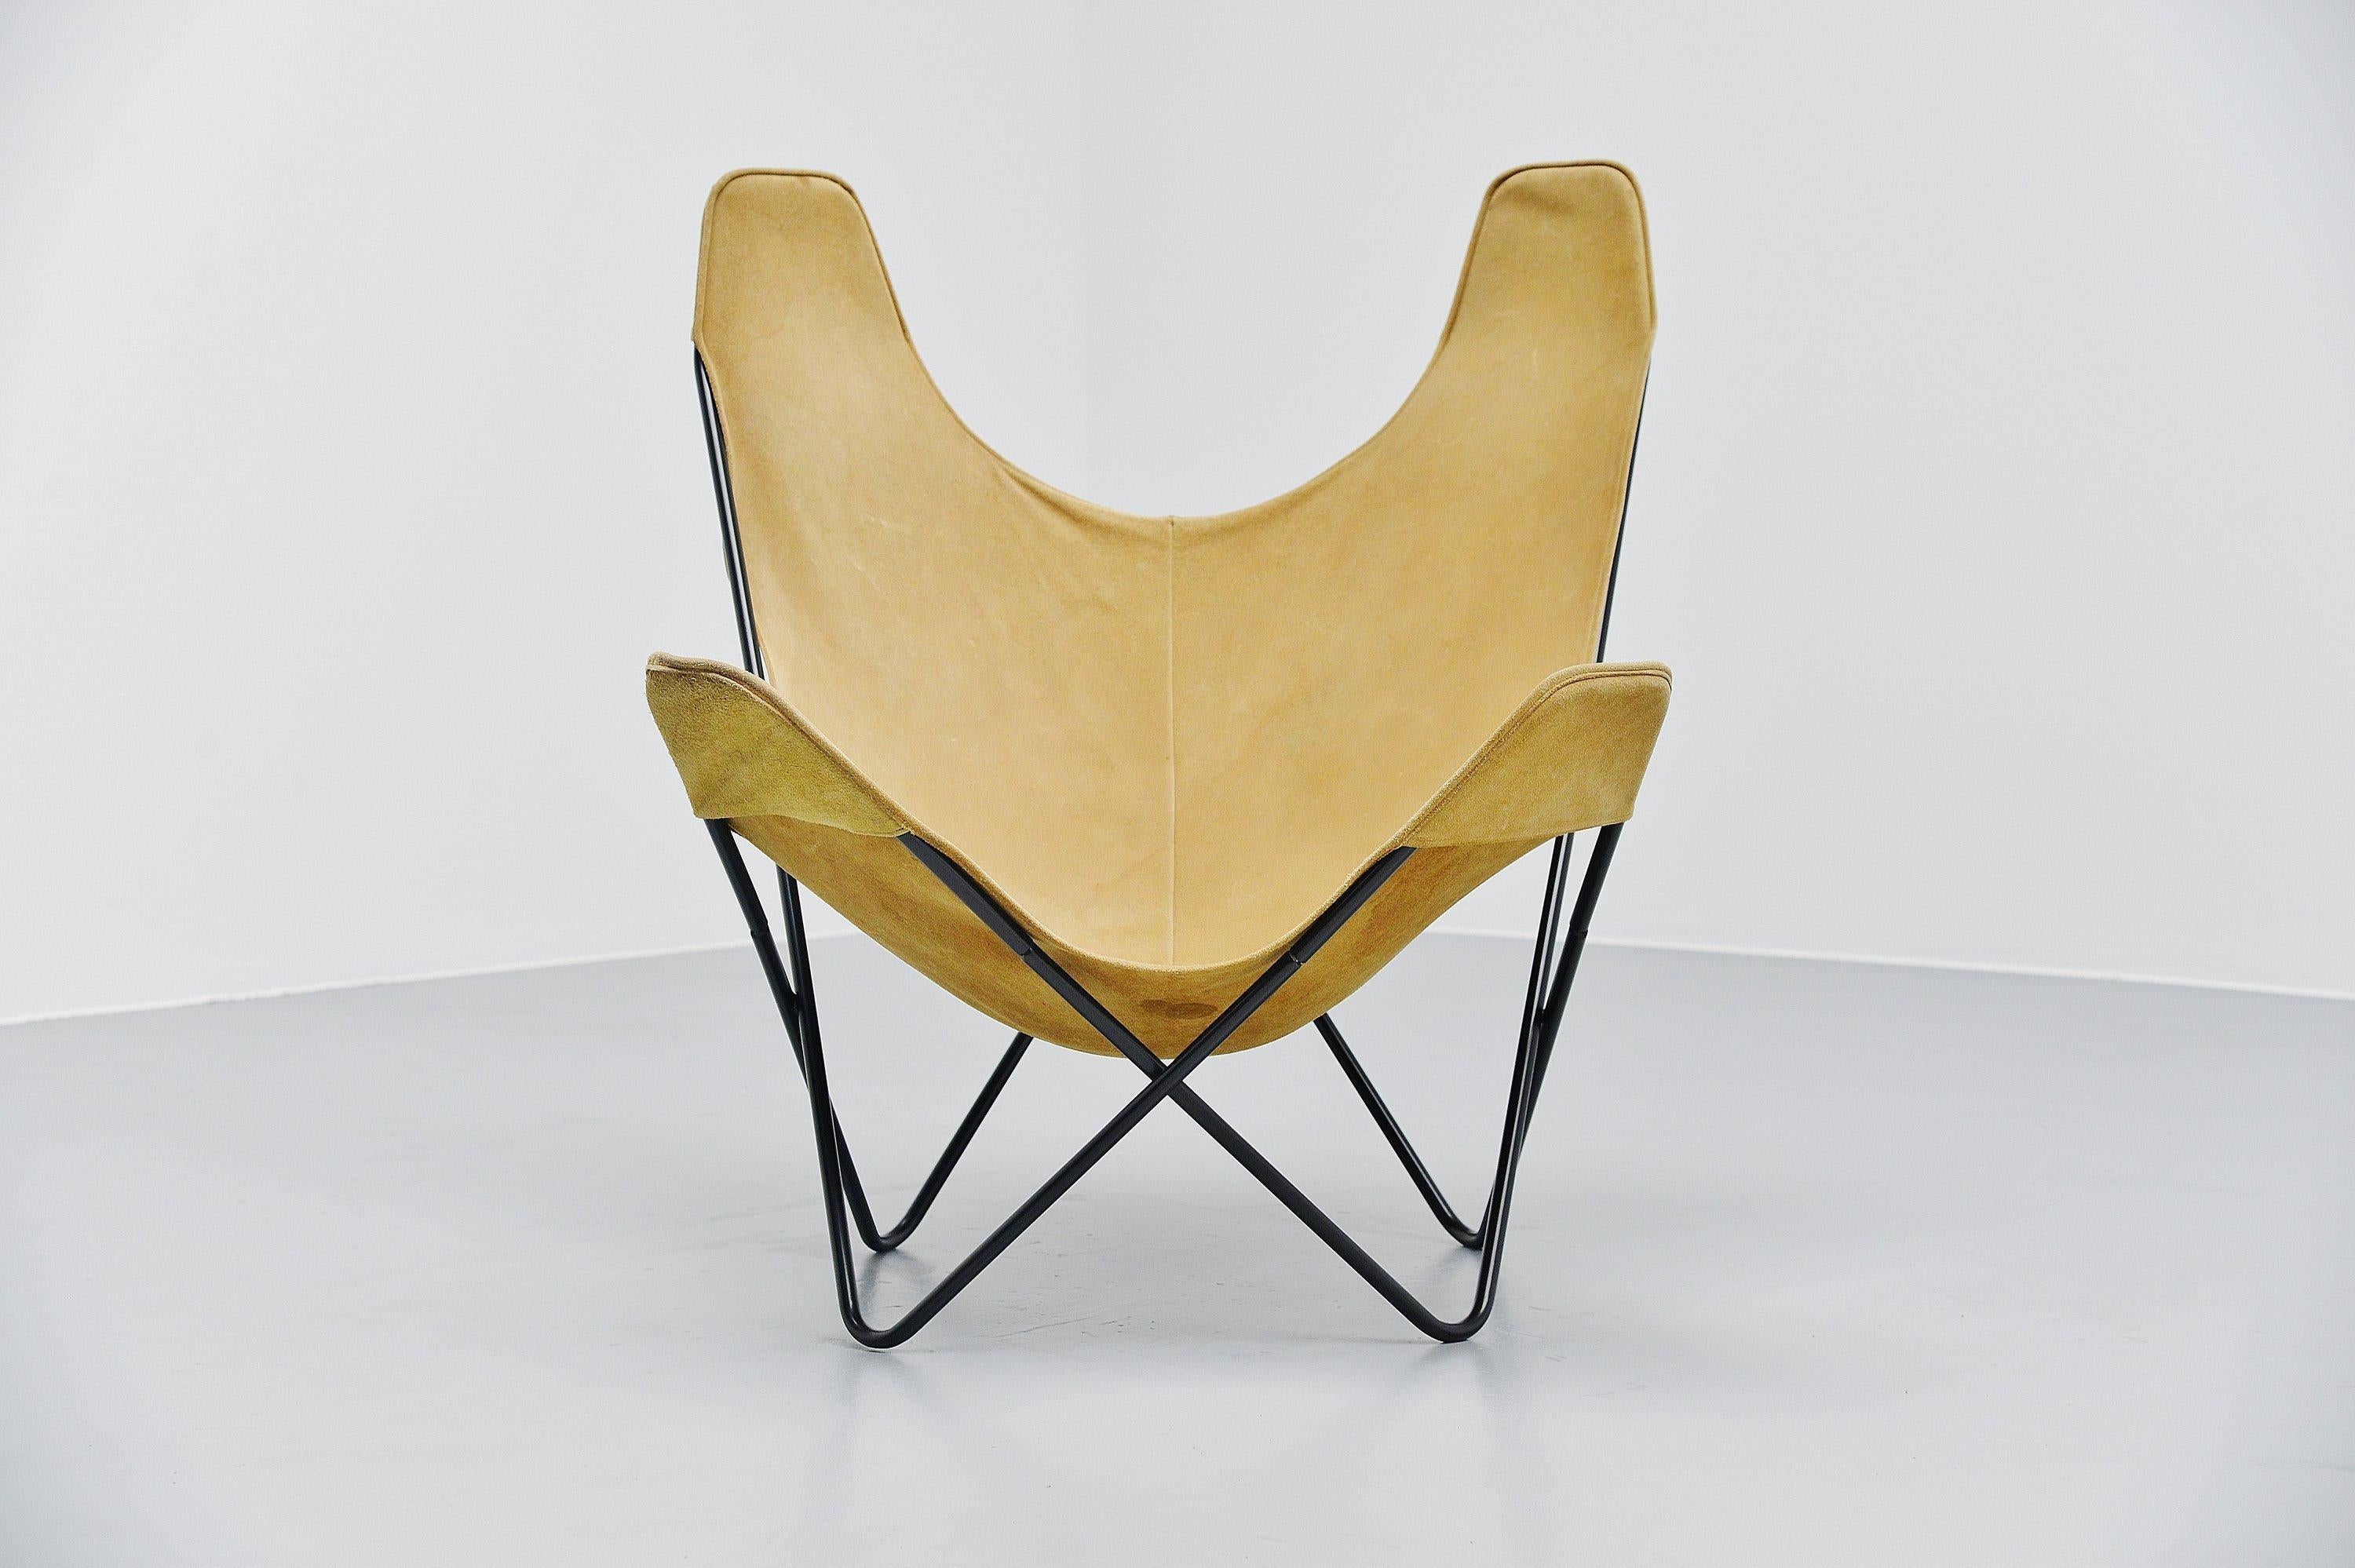 World-known iconic lounge butterfly chair designed by Jorge Hardoy-Ferrari for Knoll, USA, 1970. This lounge chair is probably one of the most copied chairs ever. Since the chair was designed in the 1950s without copyright, every company could make